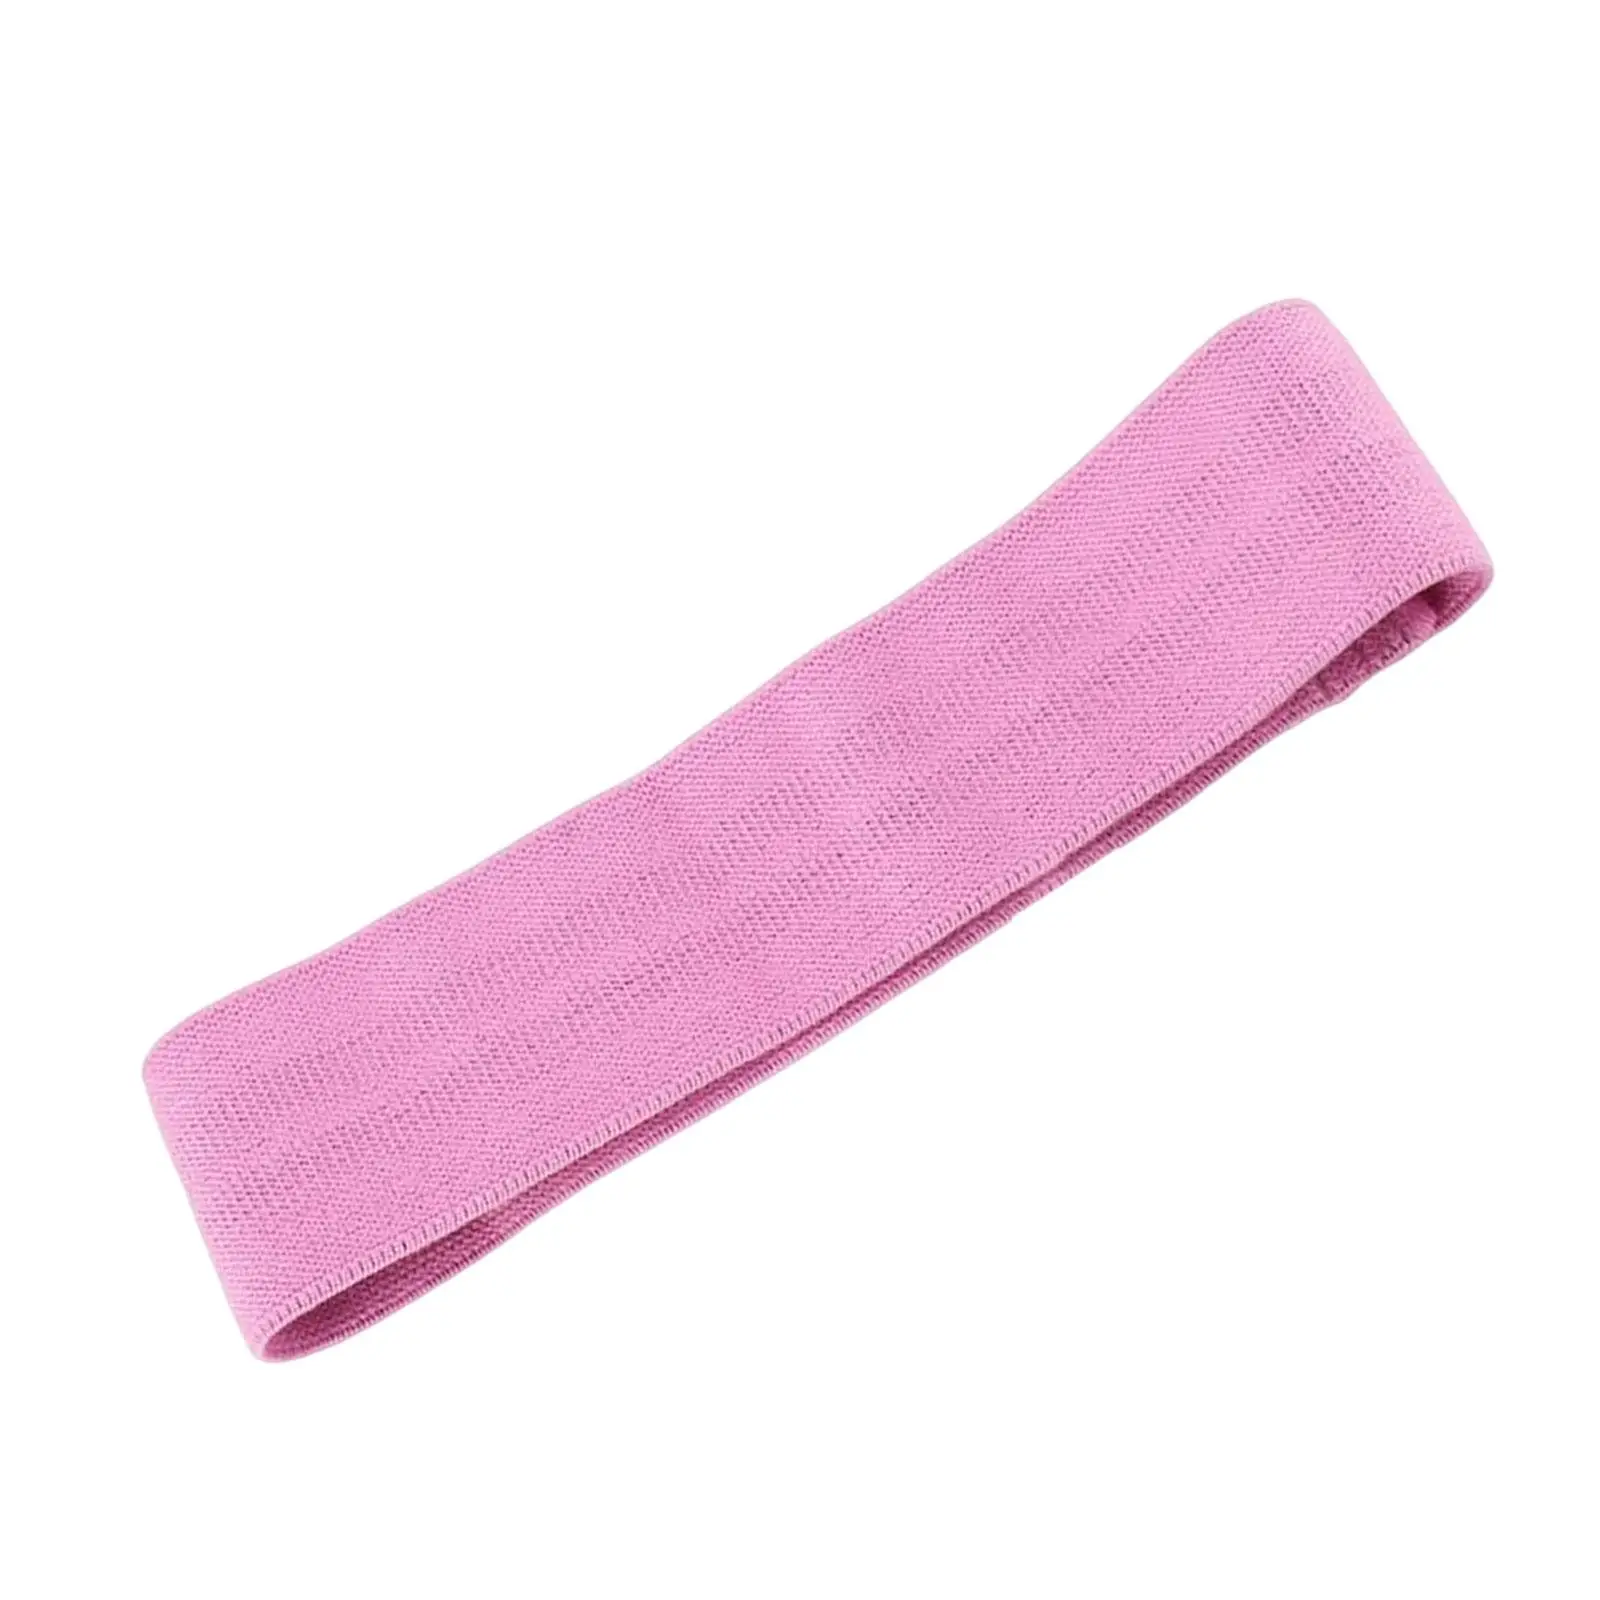 Resistance Band Lightweight Elastic Durable for Hips Training Legs and